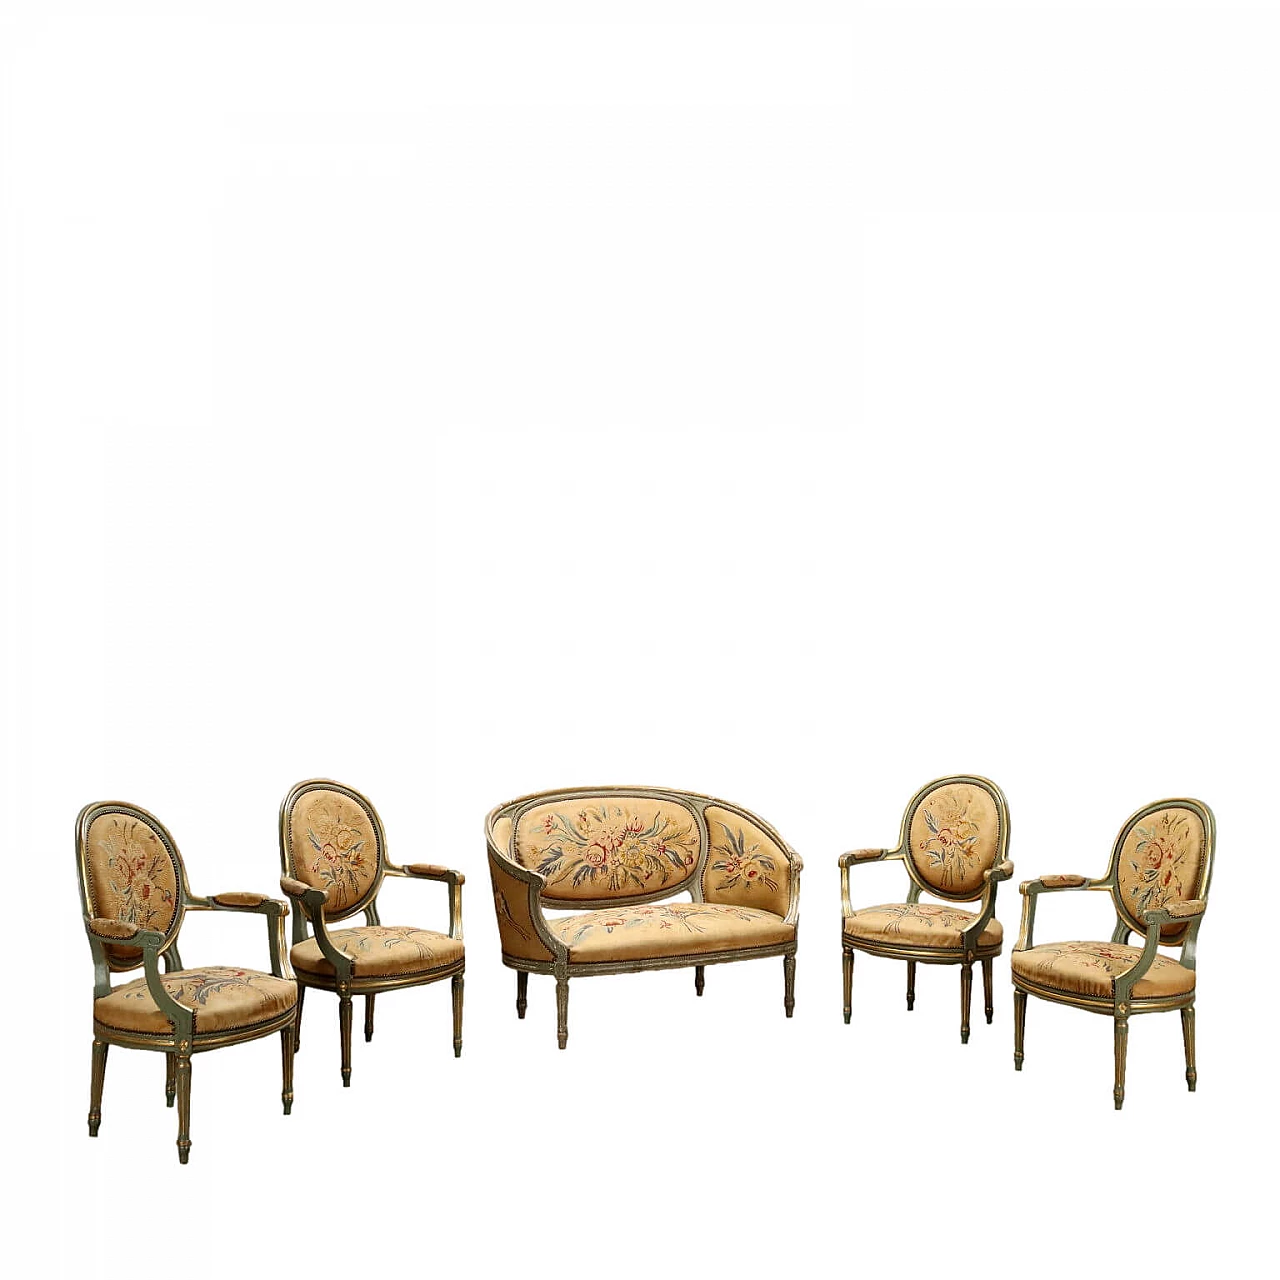 4 Neoclassical style lacquered and gilded wood armchairs and sofa, early 20th century 1